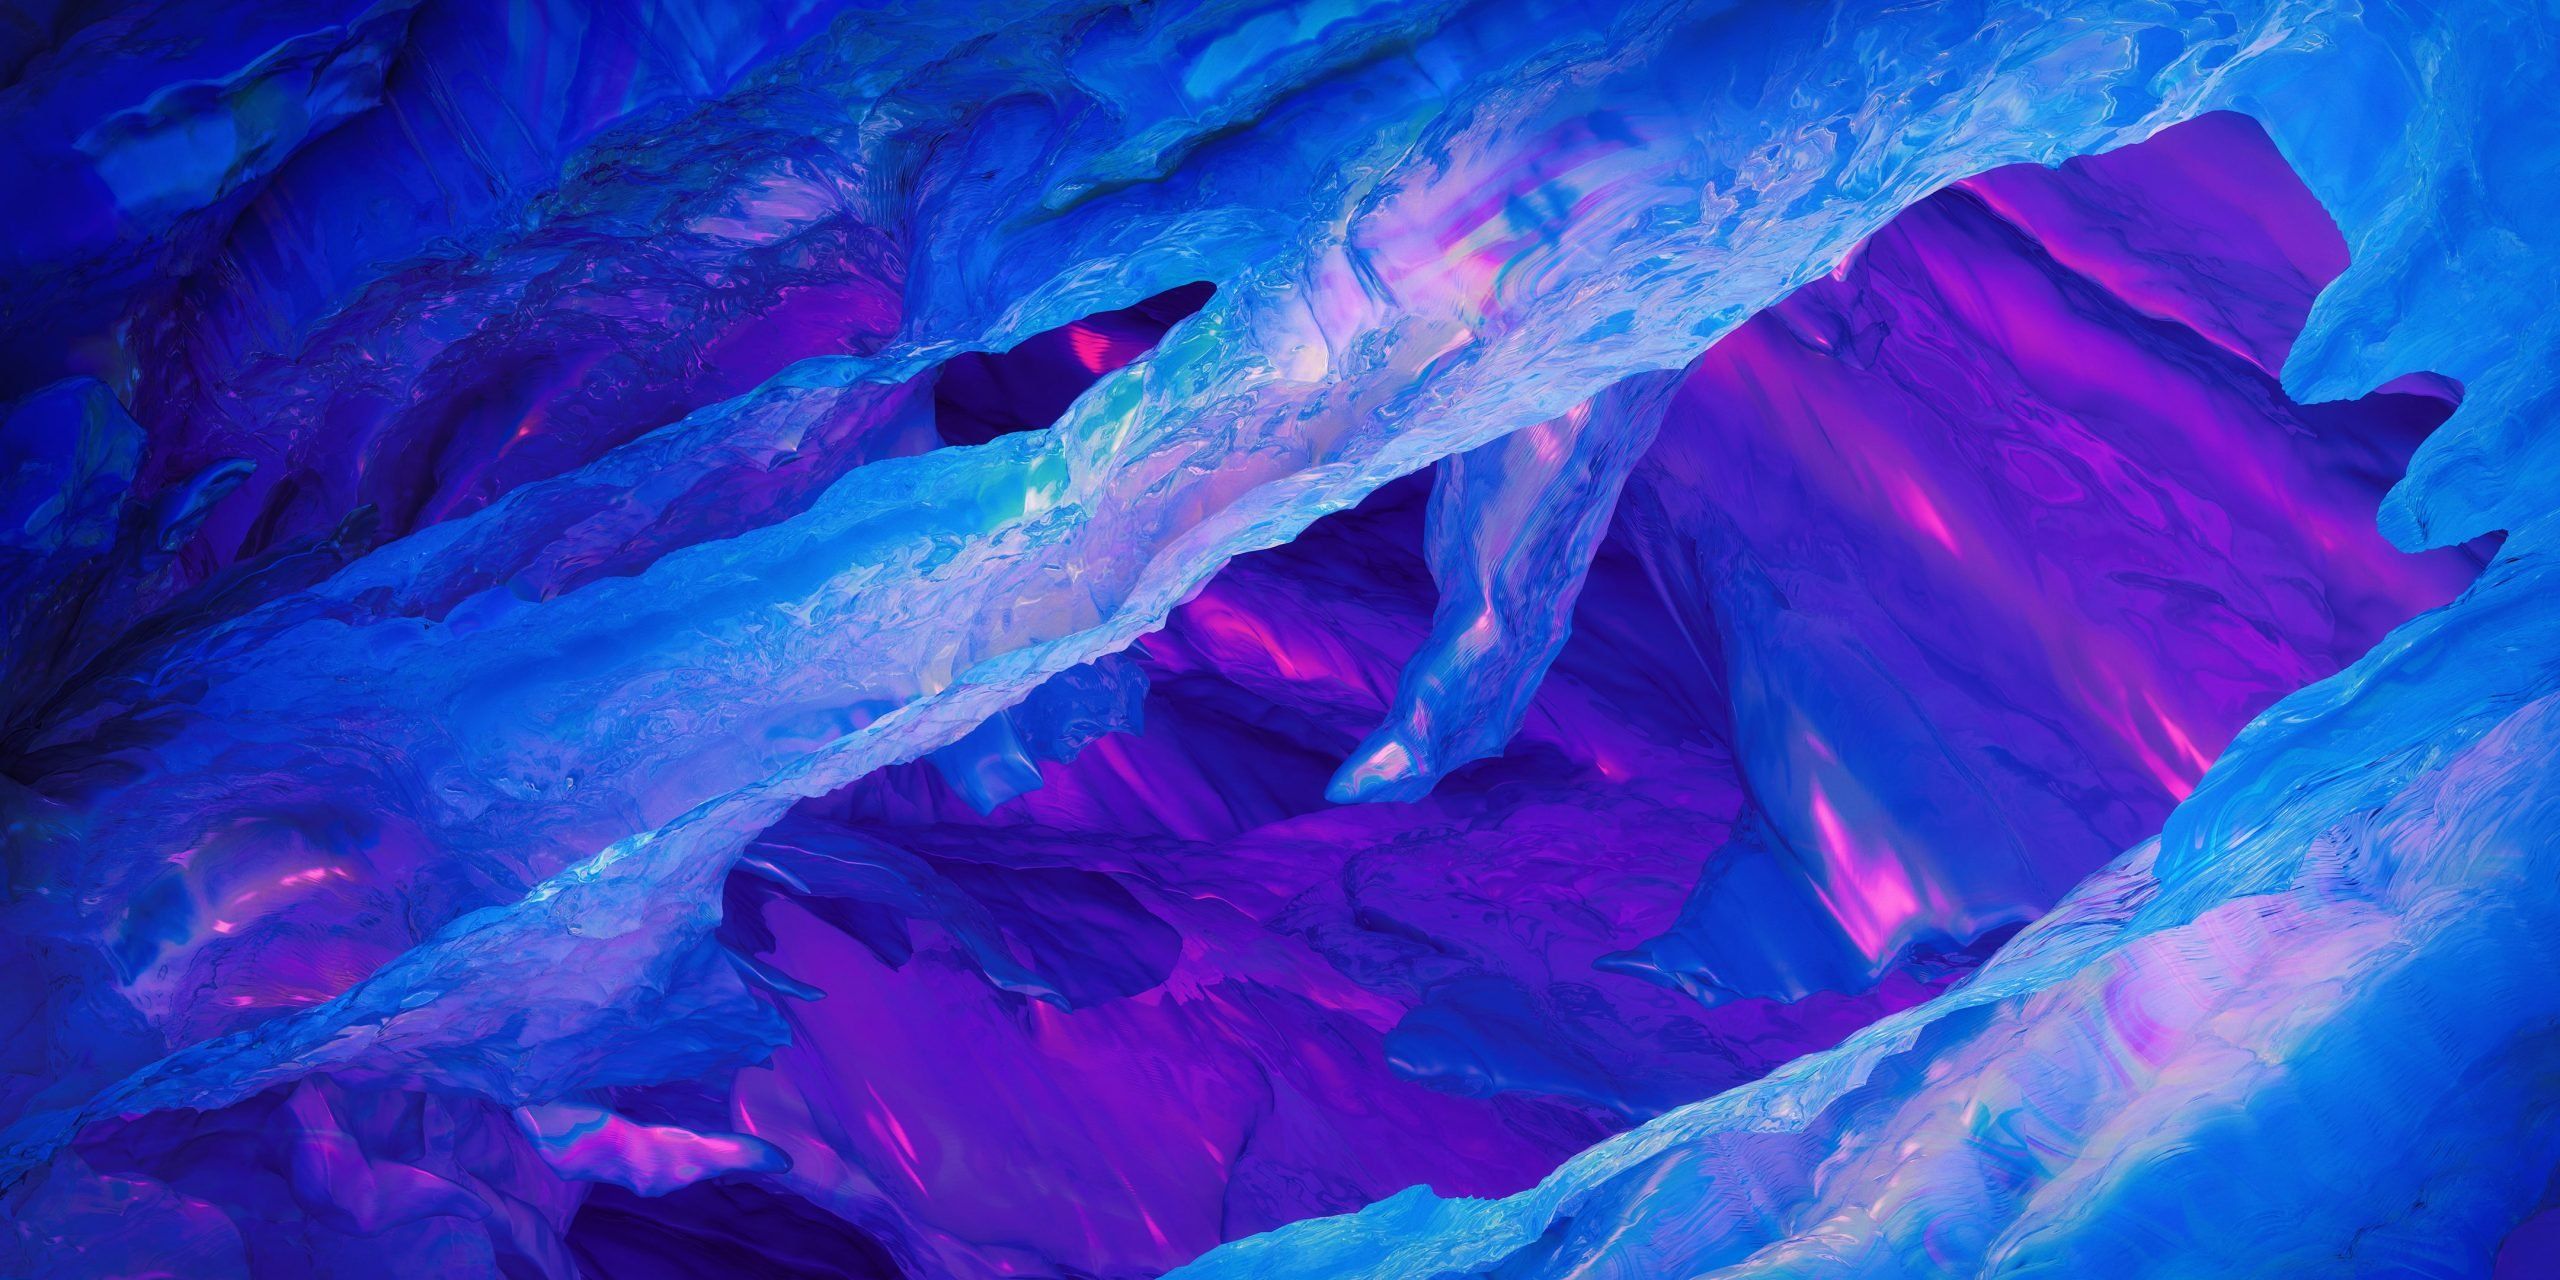 A purple cave with blue lighting - Neon blue